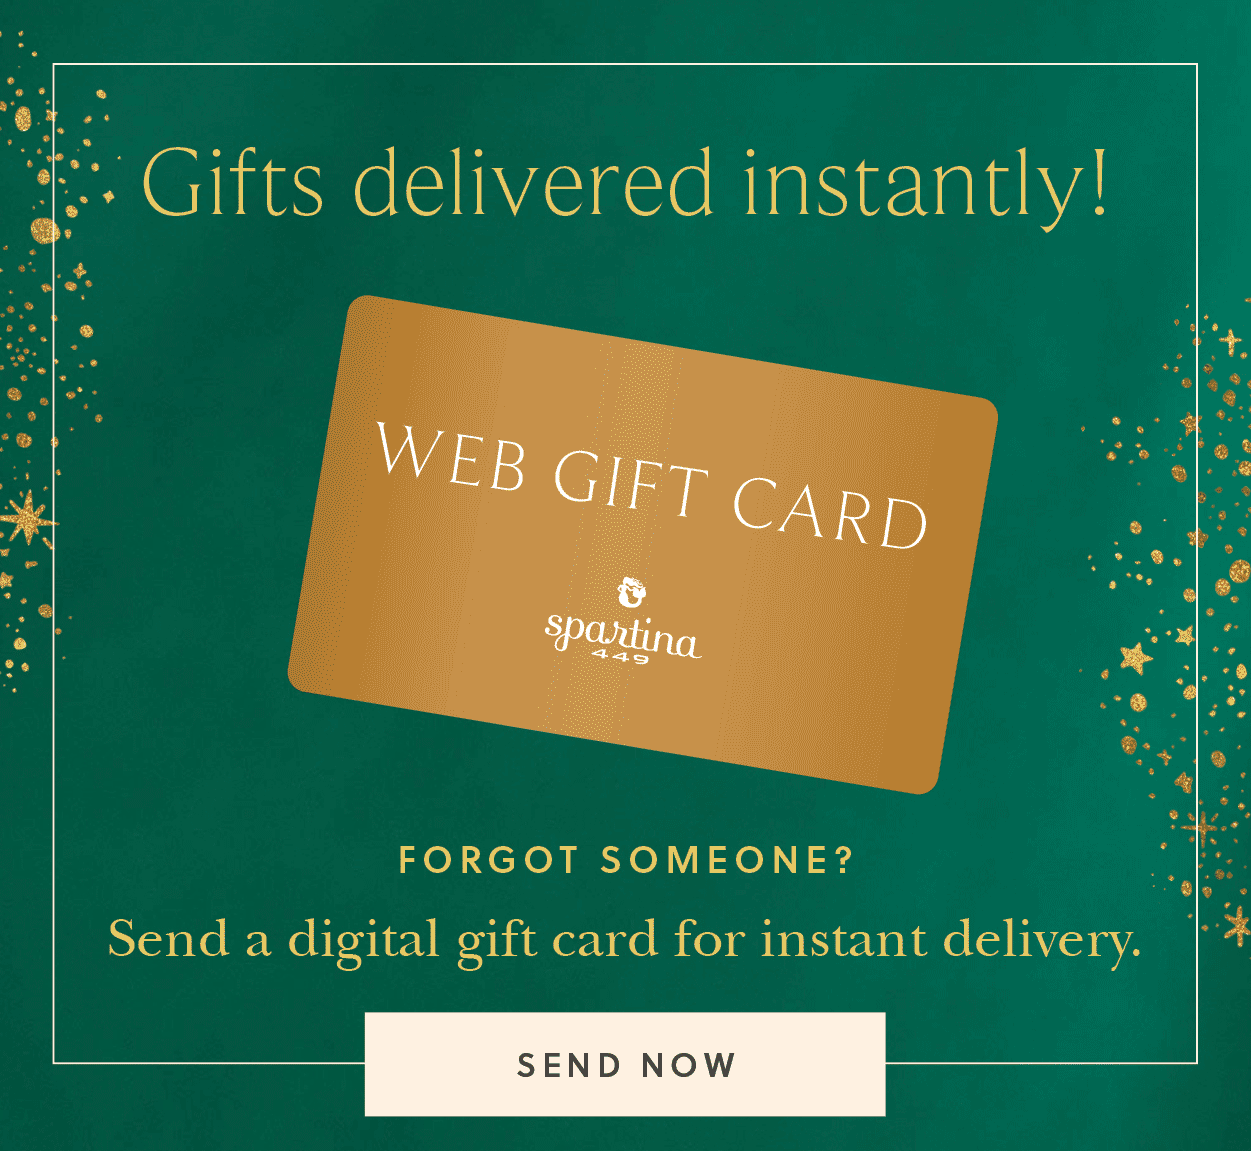 The Ultimate Last Minute Gift — E-gift Card